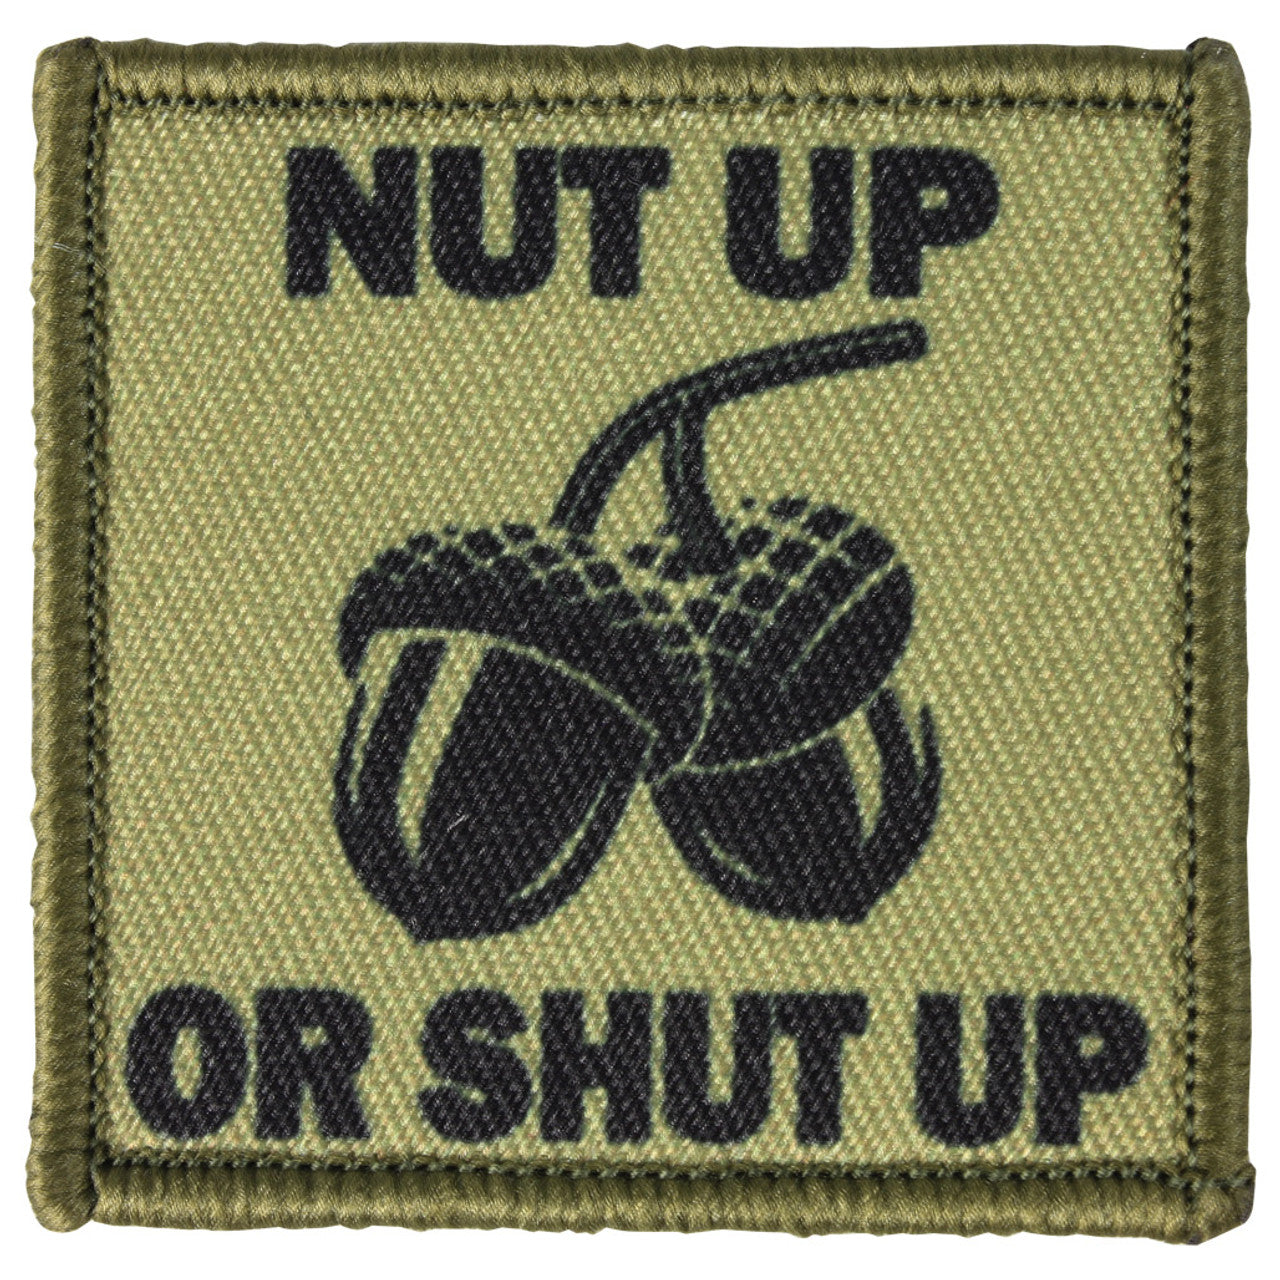 "NUT UP OR SHUT UP" MORALE PATCH